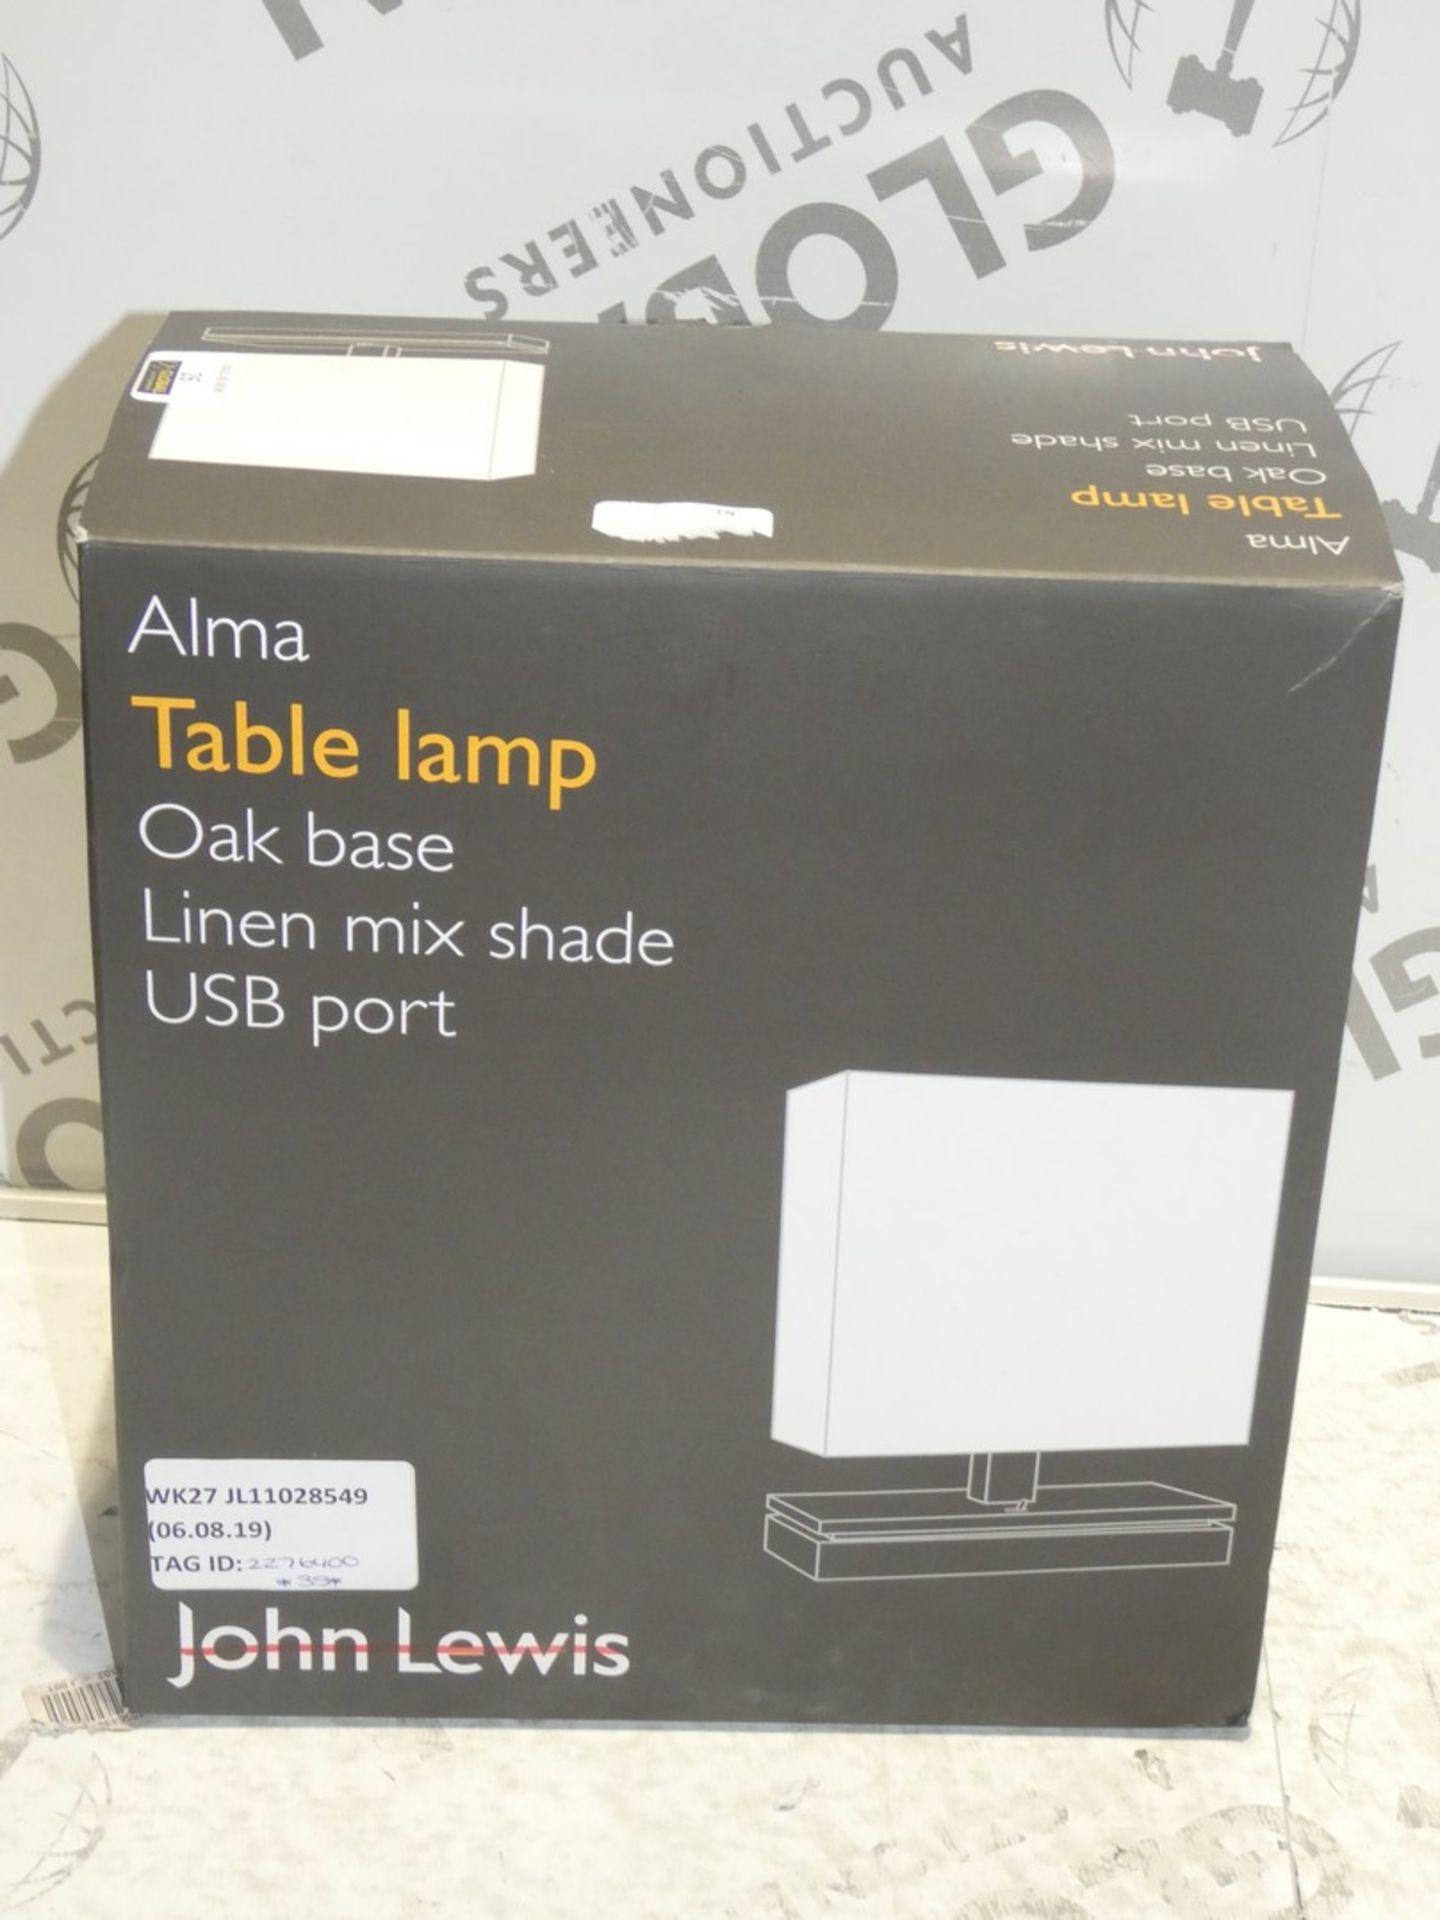 Boxed John Lewis And Partners Alma Oak Base Linen Mix Shade Table Lamp With USB Port RRP£35.0 (